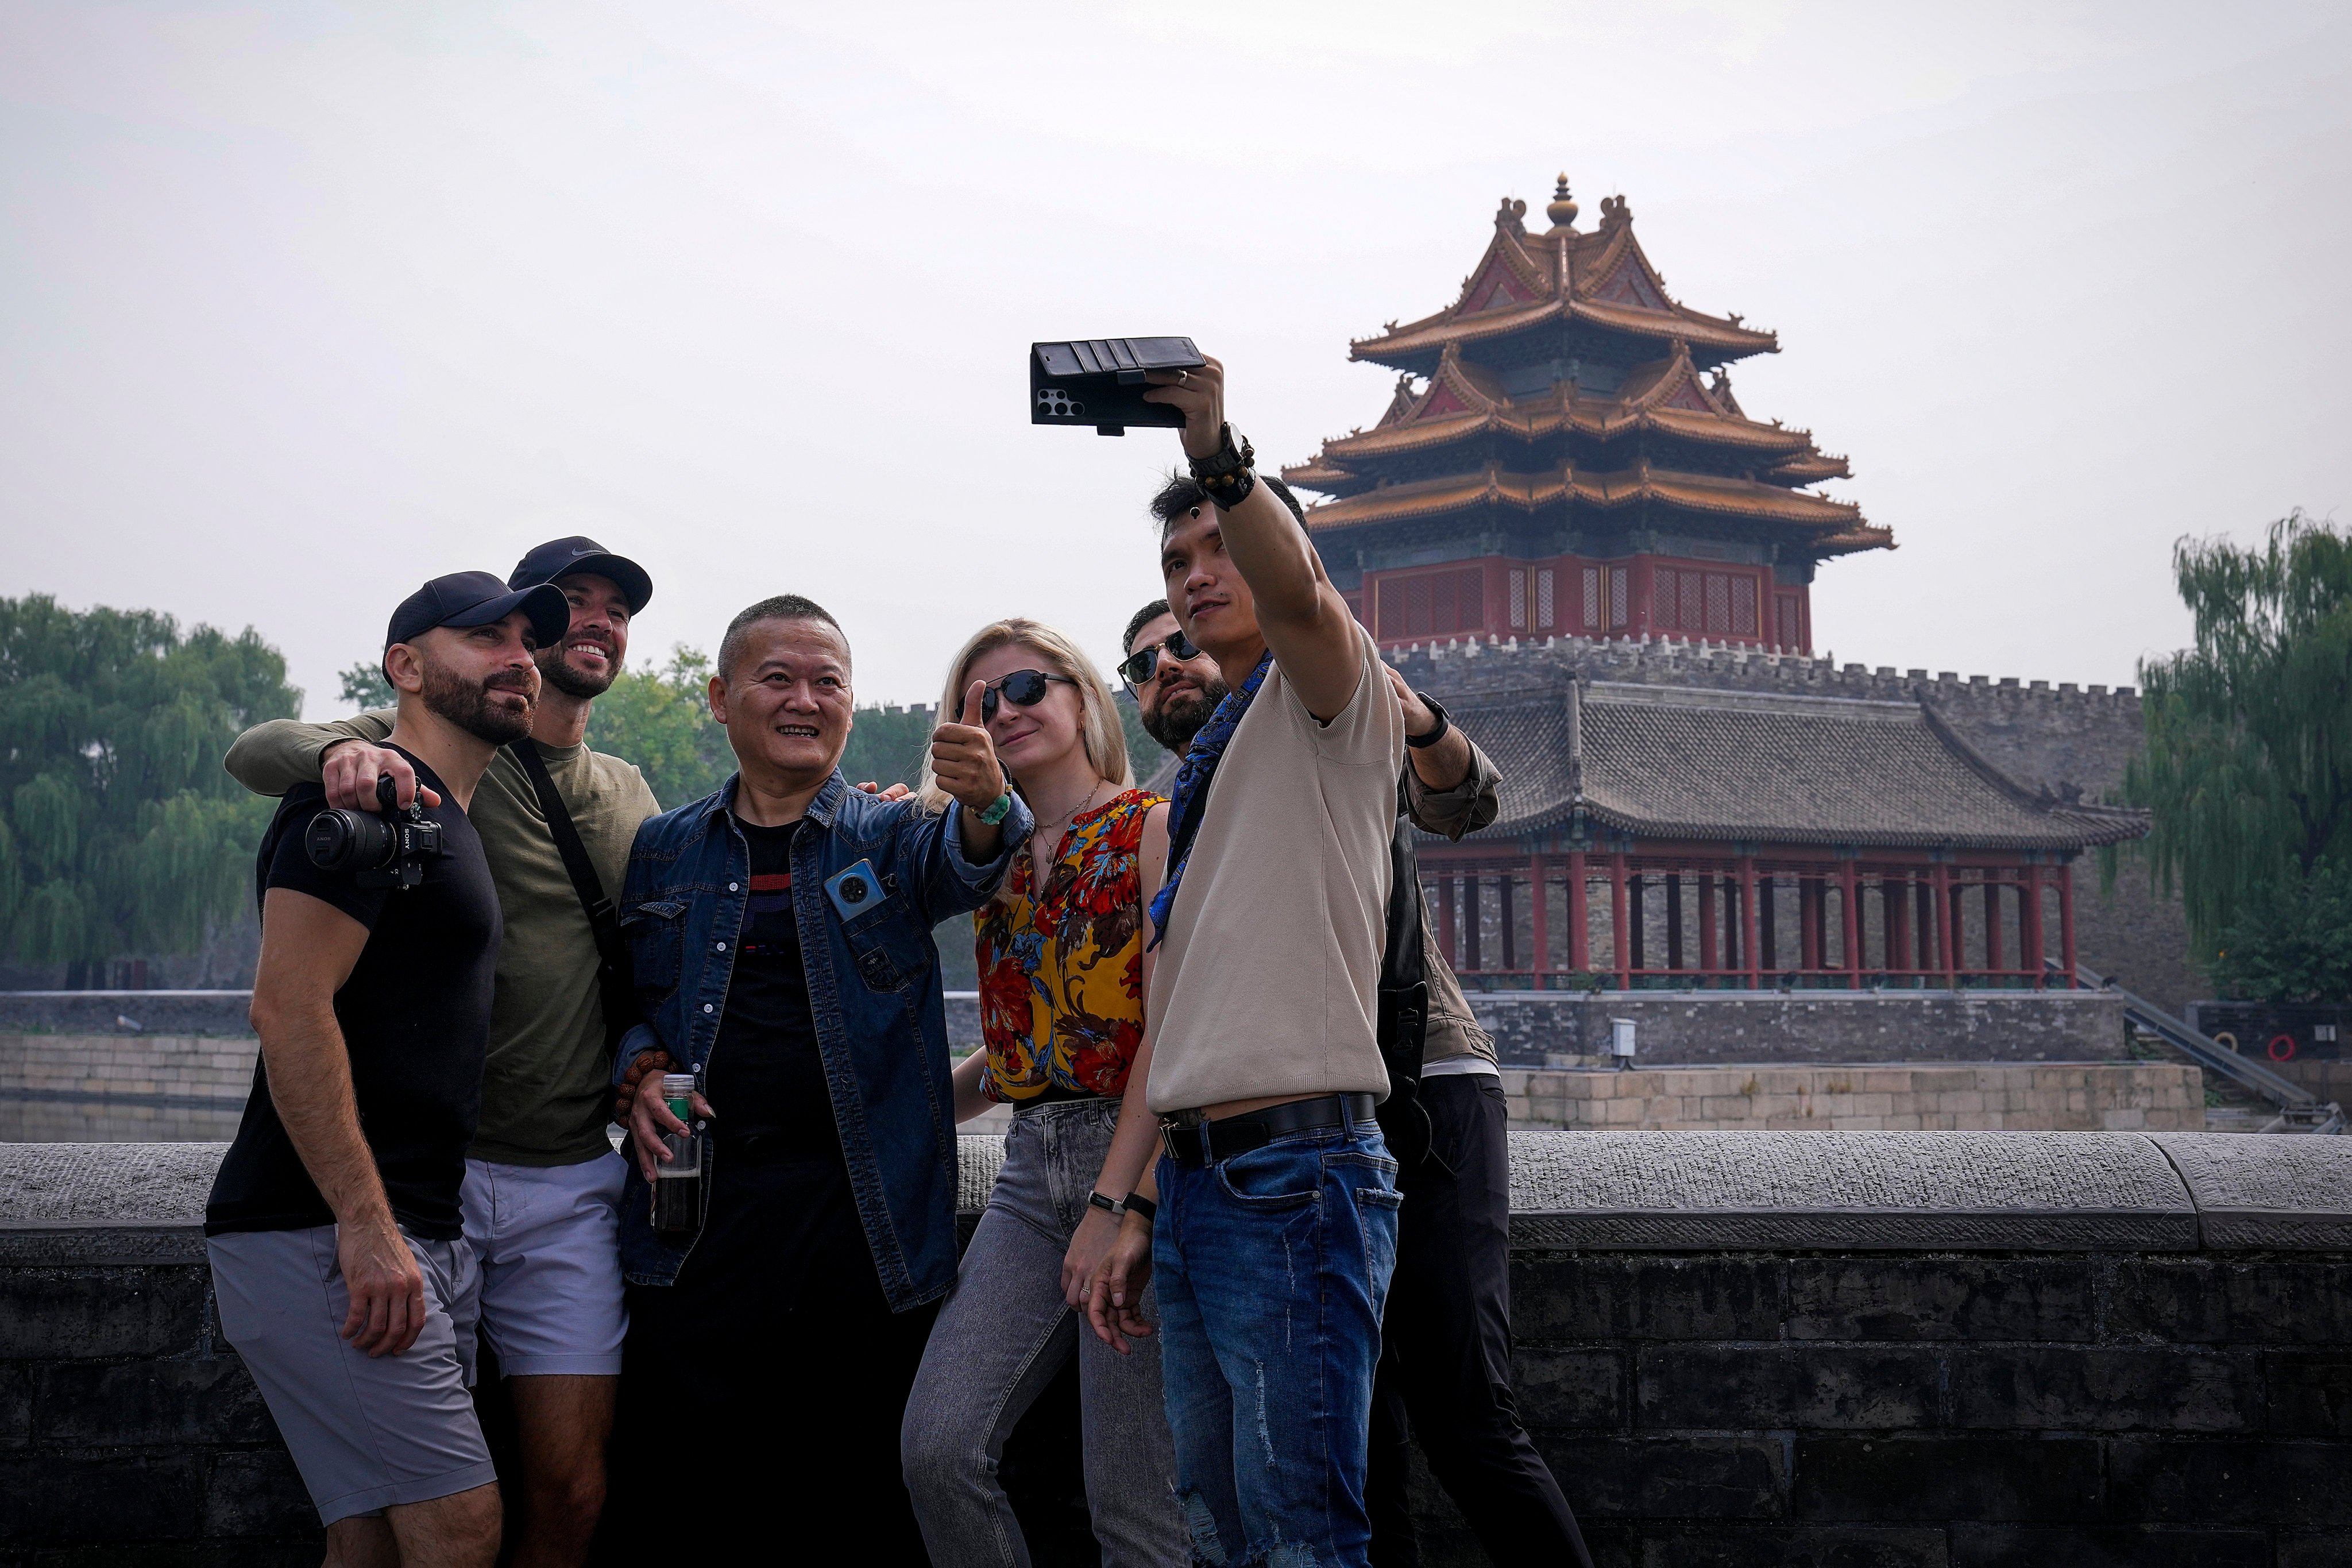 China’s economic planners are looking to beef up tourism and investment by enticing foreigners to visit and spend, according to analysts. Photo: AP